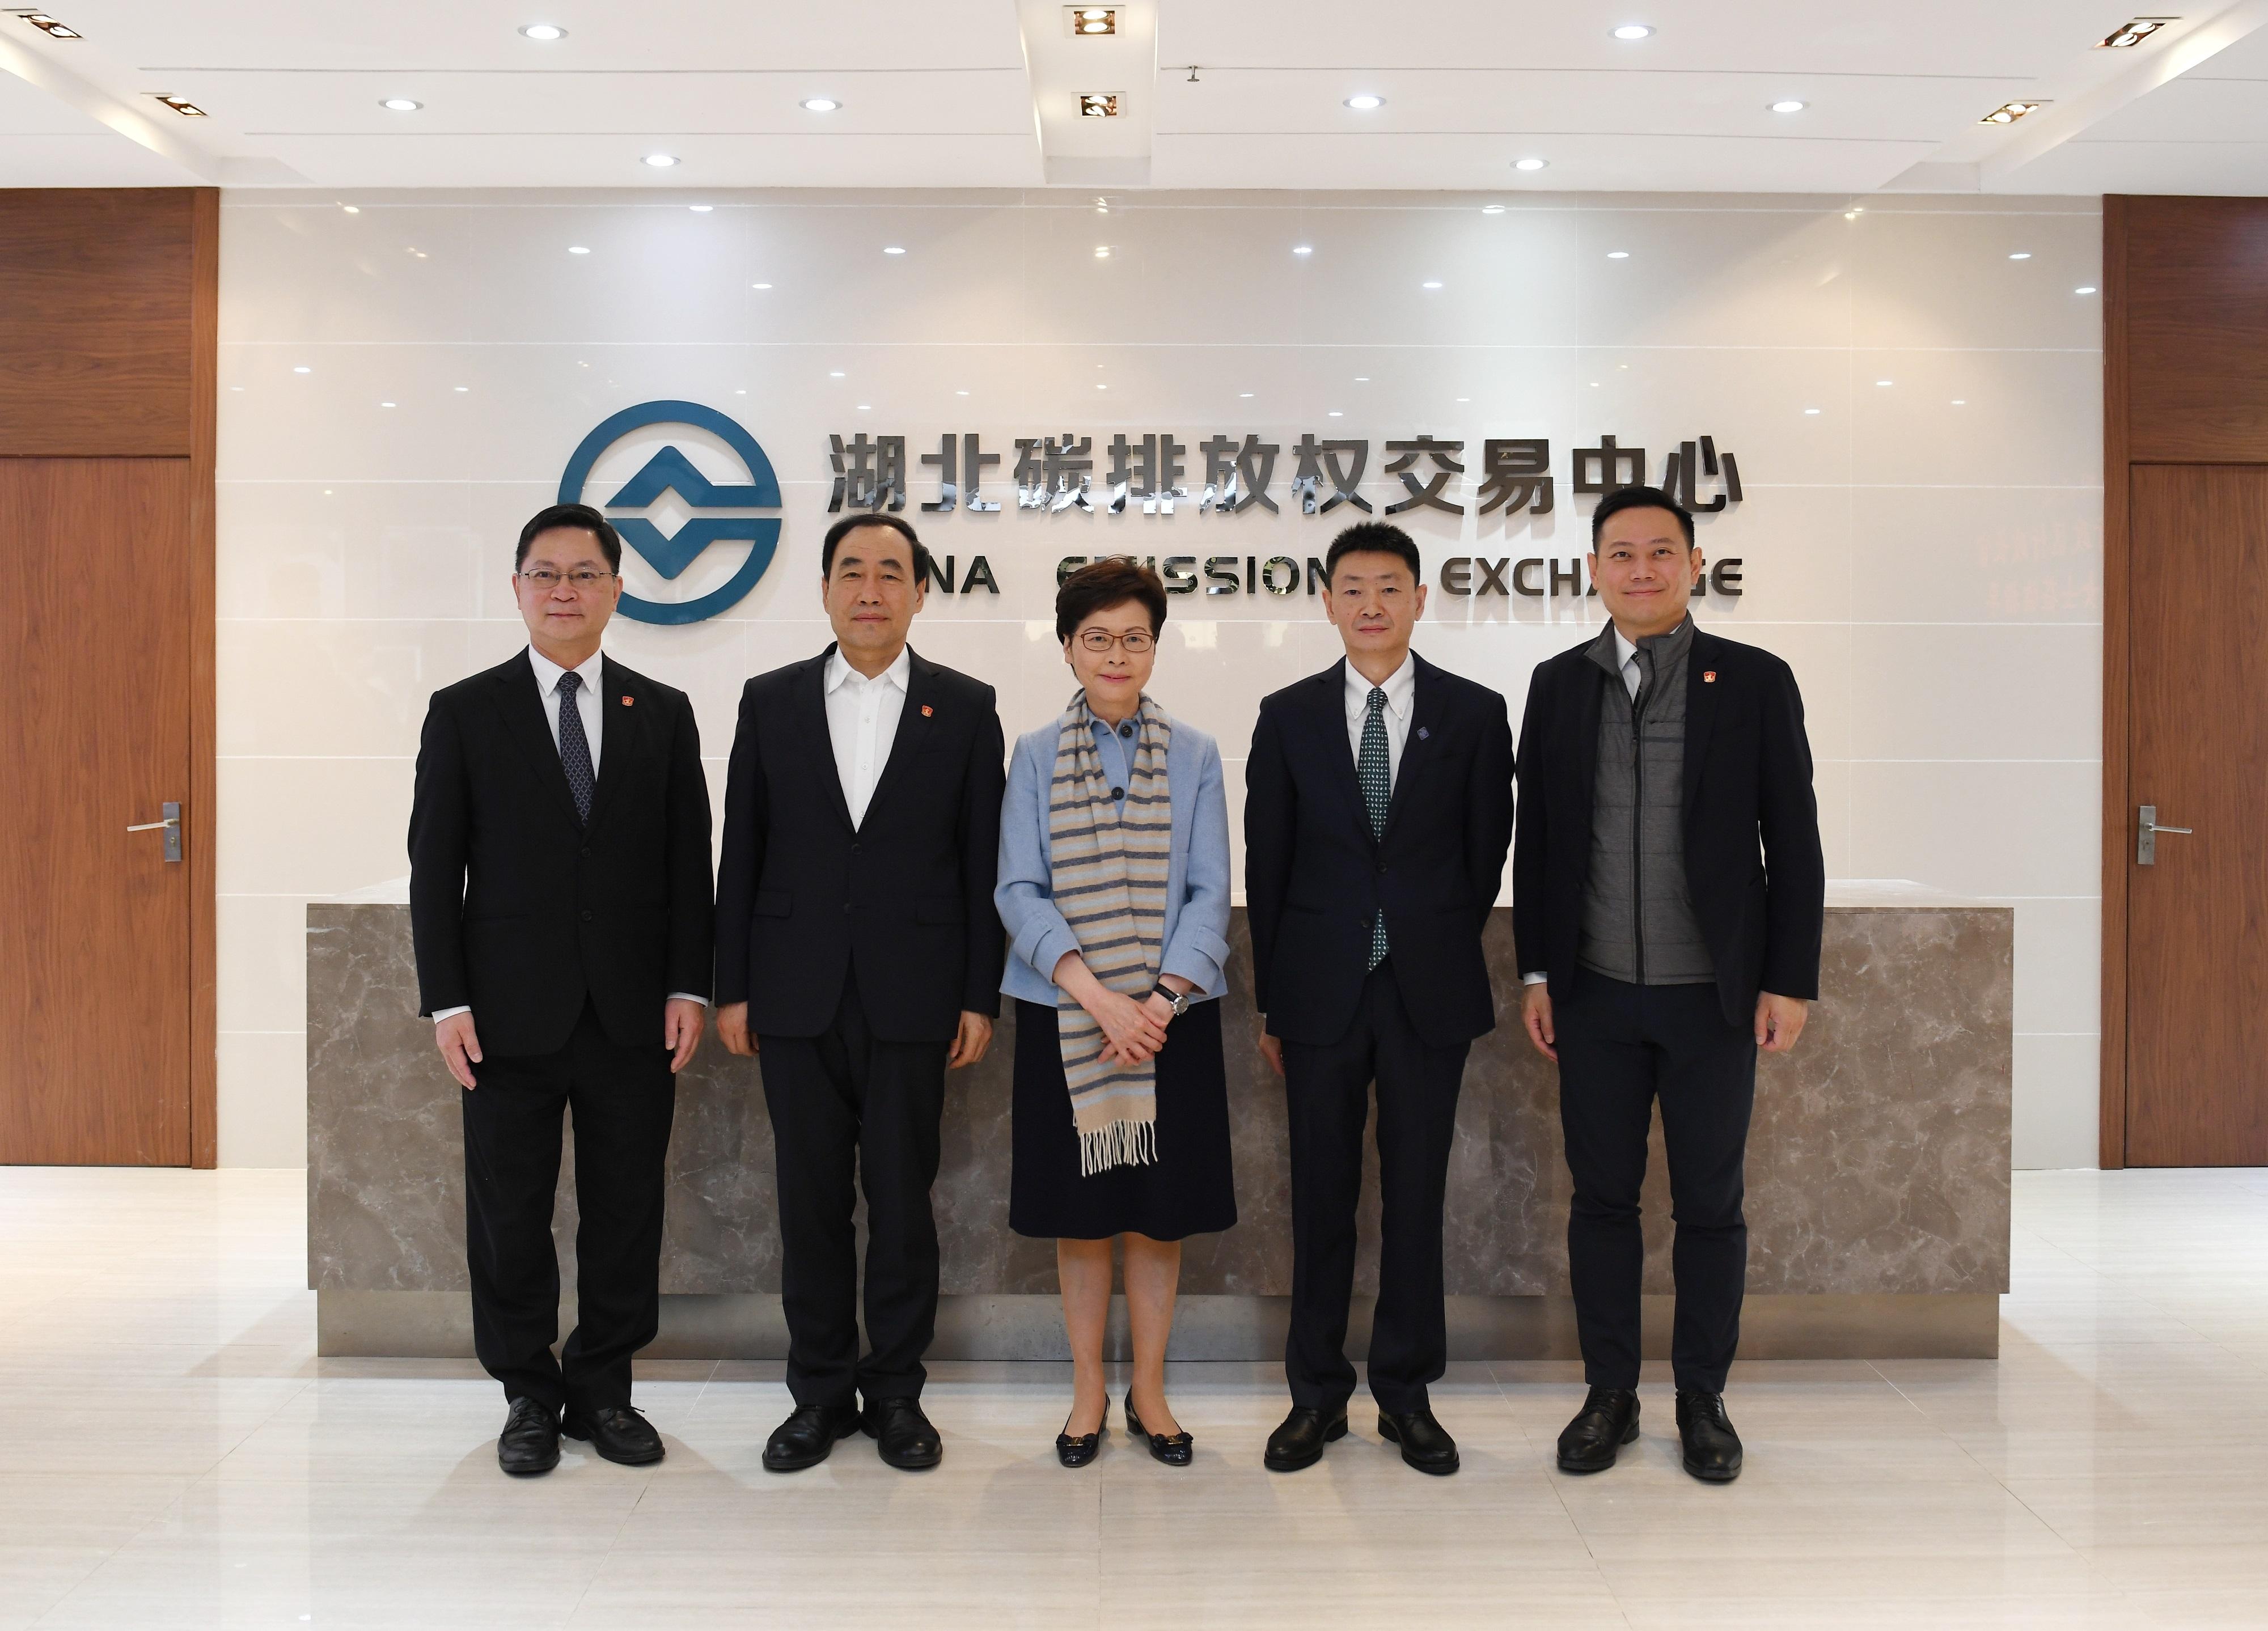 The Chief Executive, Mrs Carrie Lam, visited the China Hubei Emission Exchange today (December 1). Mrs Lam (centre) is pictured with Vice Governor of Hubei Province Mr Zhao Haishan (second left); the General Manager of the China Hubei Emission Exchange, Mr Liu Hanwu (second right); the Secretary for Innovation and Technology, Mr Alfred Sit (first left); and the Secretary for Home Affairs, Mr Caspar Tsui (first right).